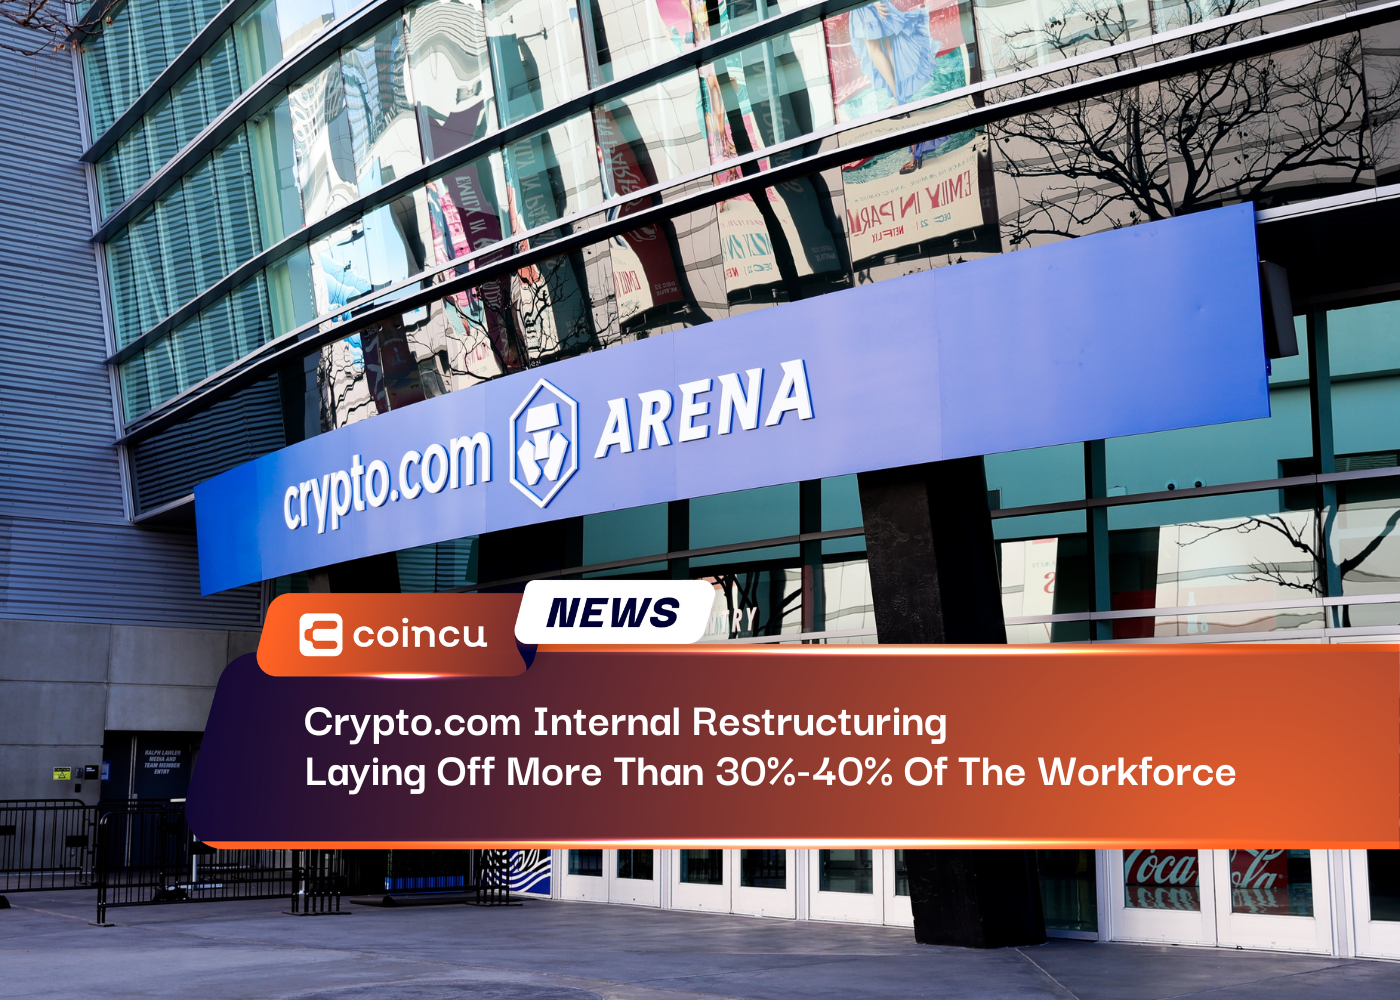 Crypto.com Internal Restructuring Laying Off More Than 30%-40% Of The Workforce